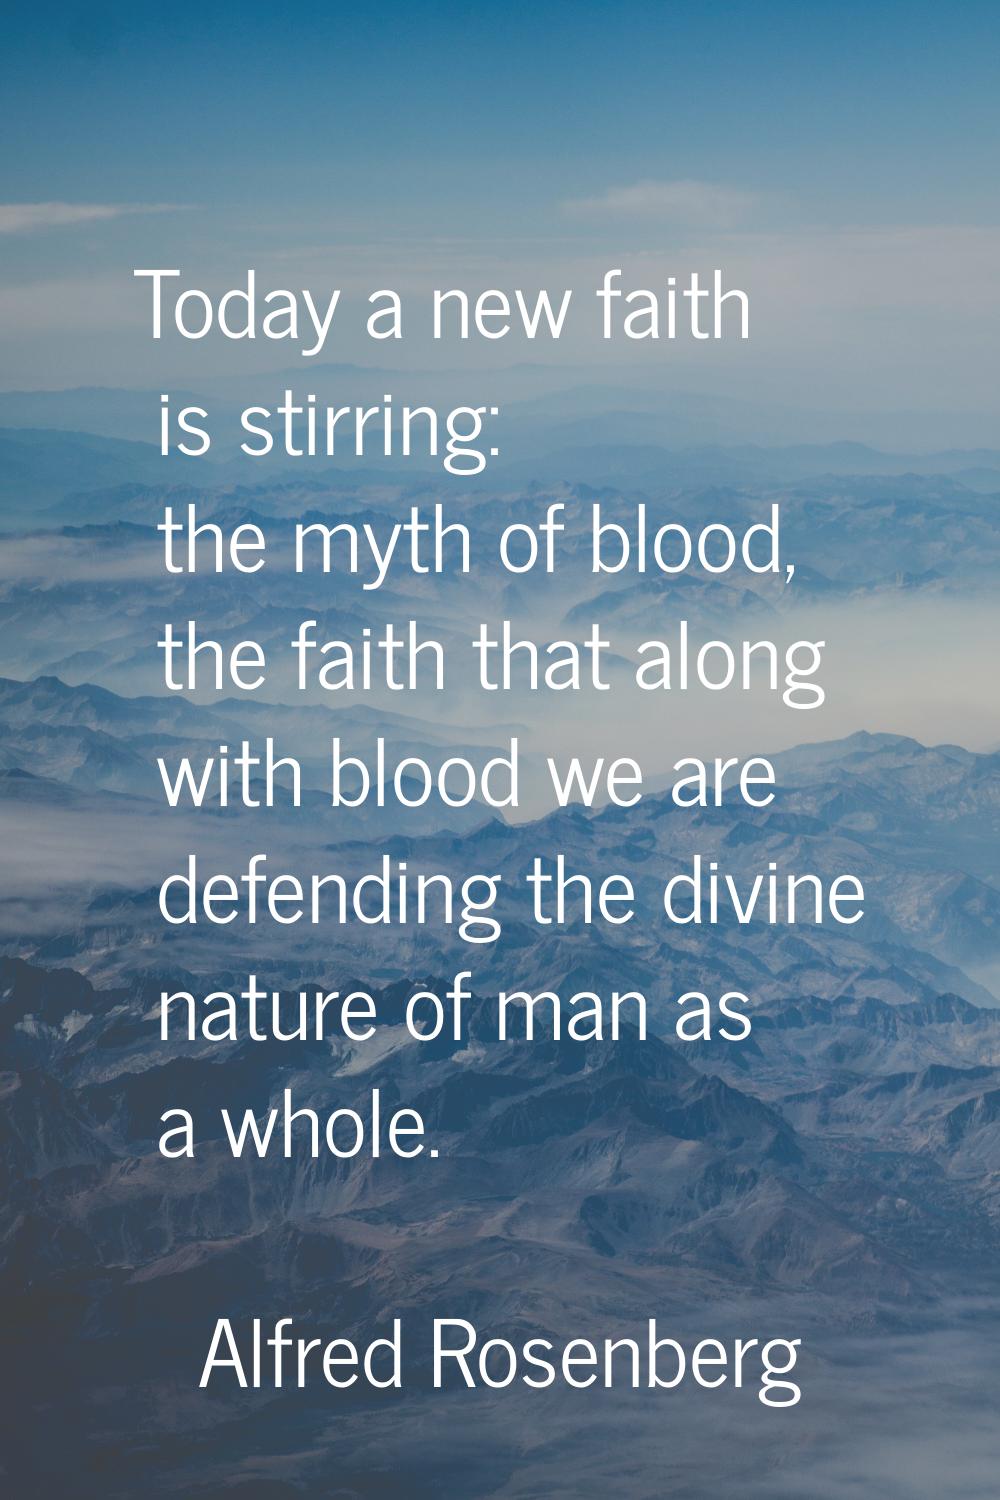 Today a new faith is stirring: the myth of blood, the faith that along with blood we are defending 